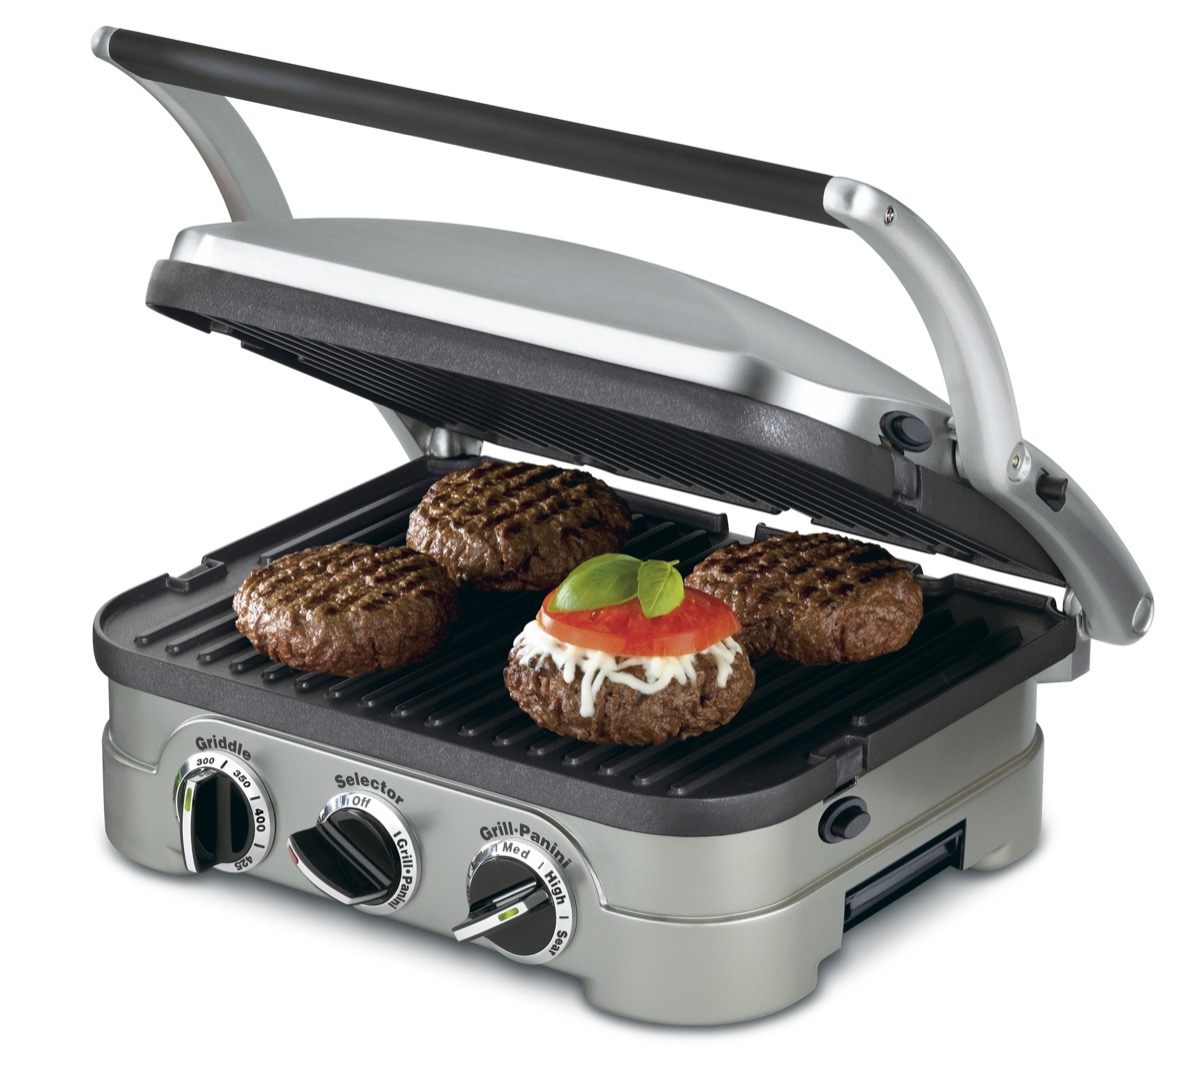 Tabletop grill with burgers cooking